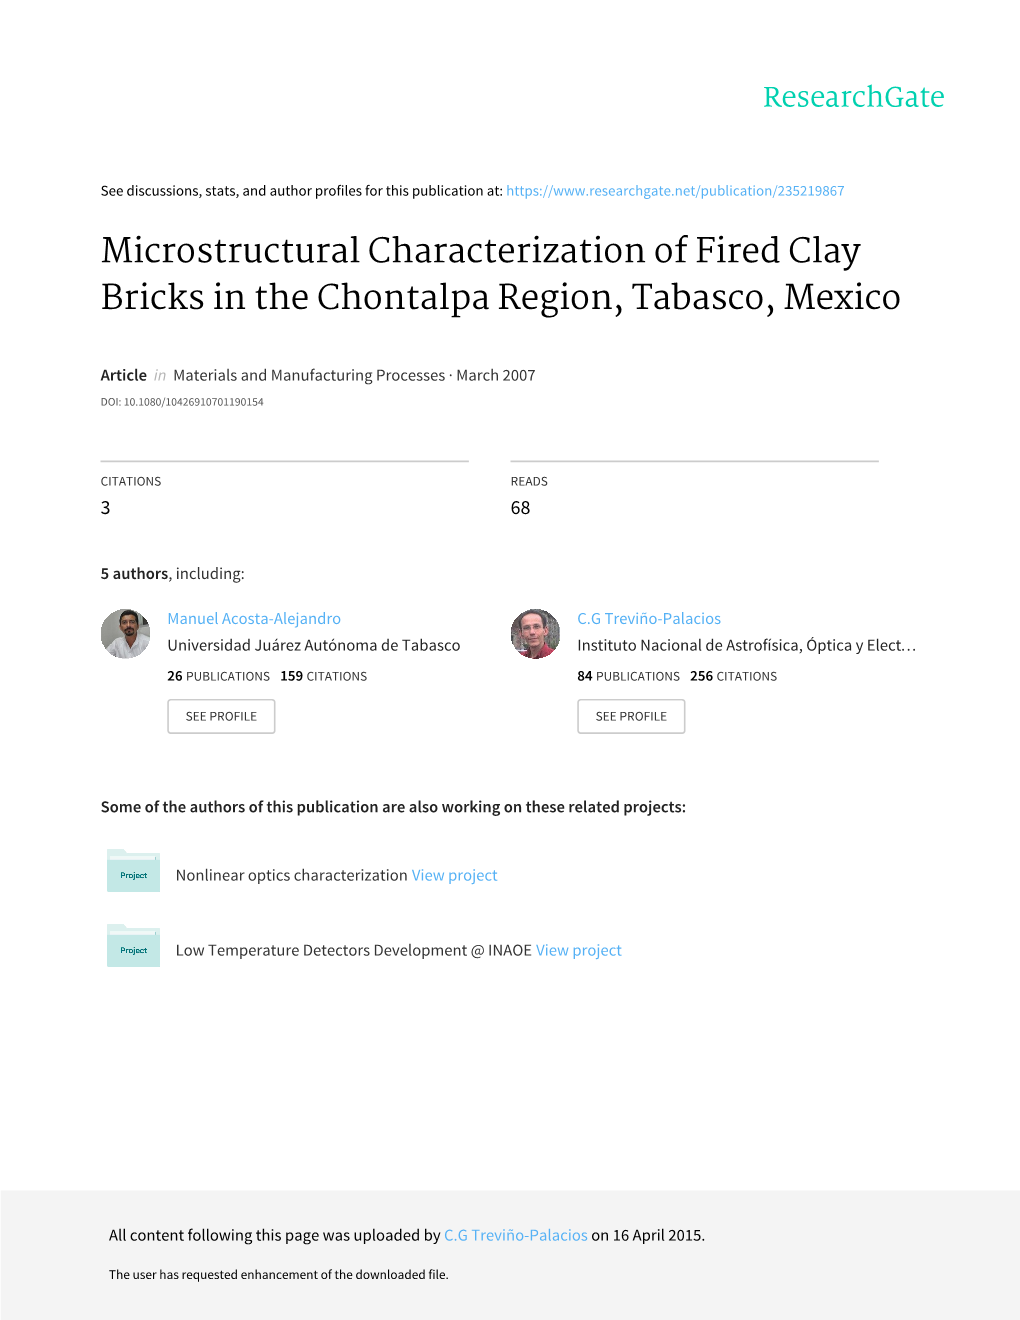 Microstructural Characterization of Fired Clay Bricks in the Chontalpa Region, Tabasco, Mexico